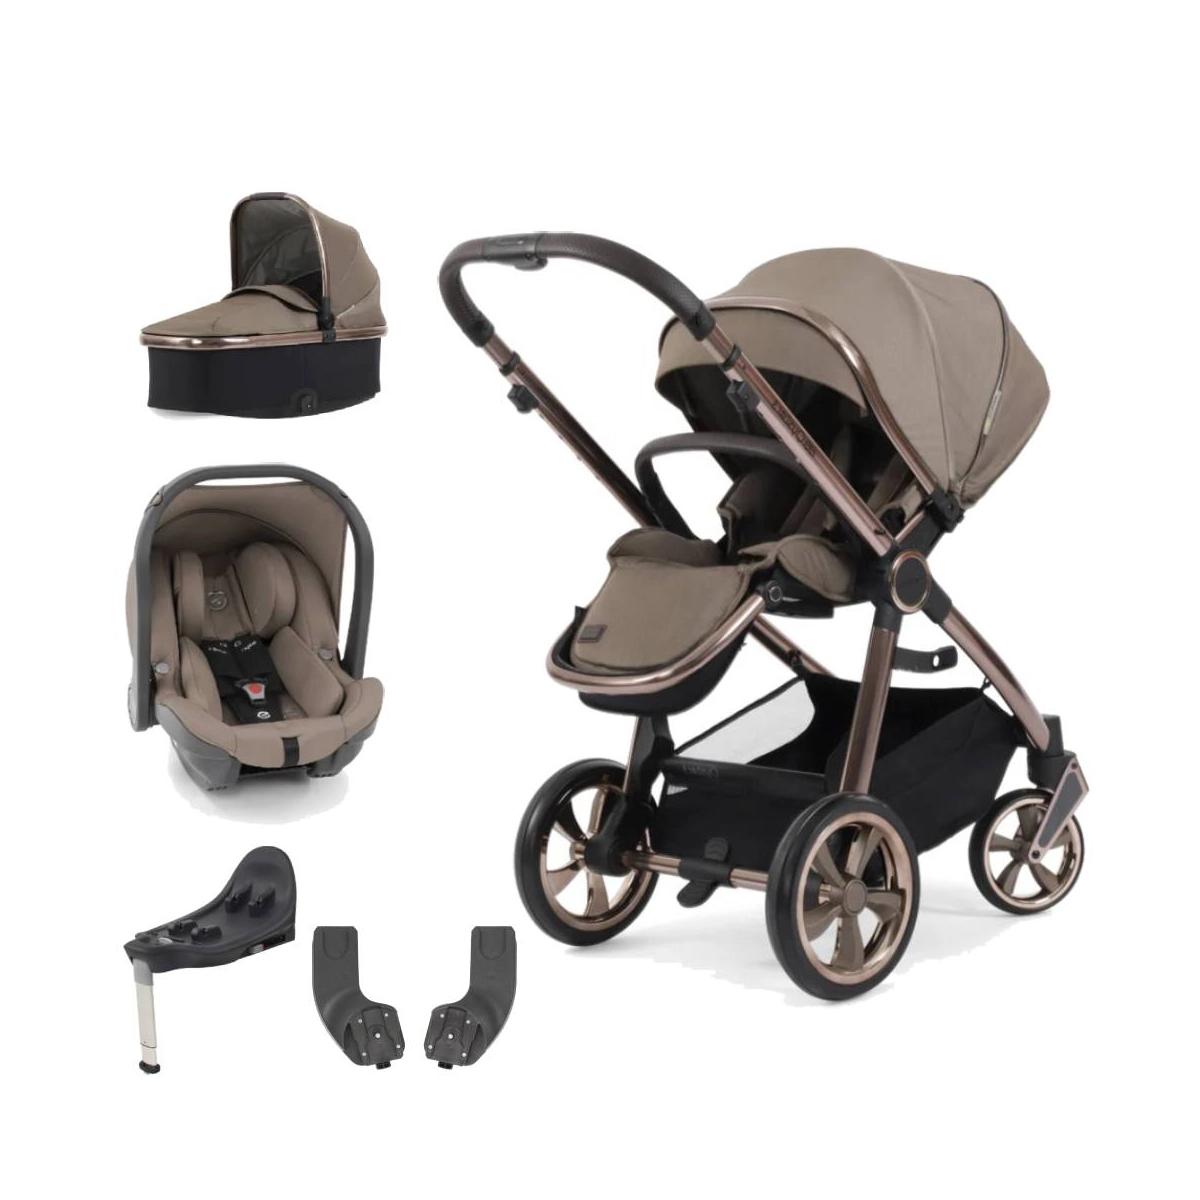 BabyStyle Oyster 3 Bronze Chassis Essential 5 Piece Travel System